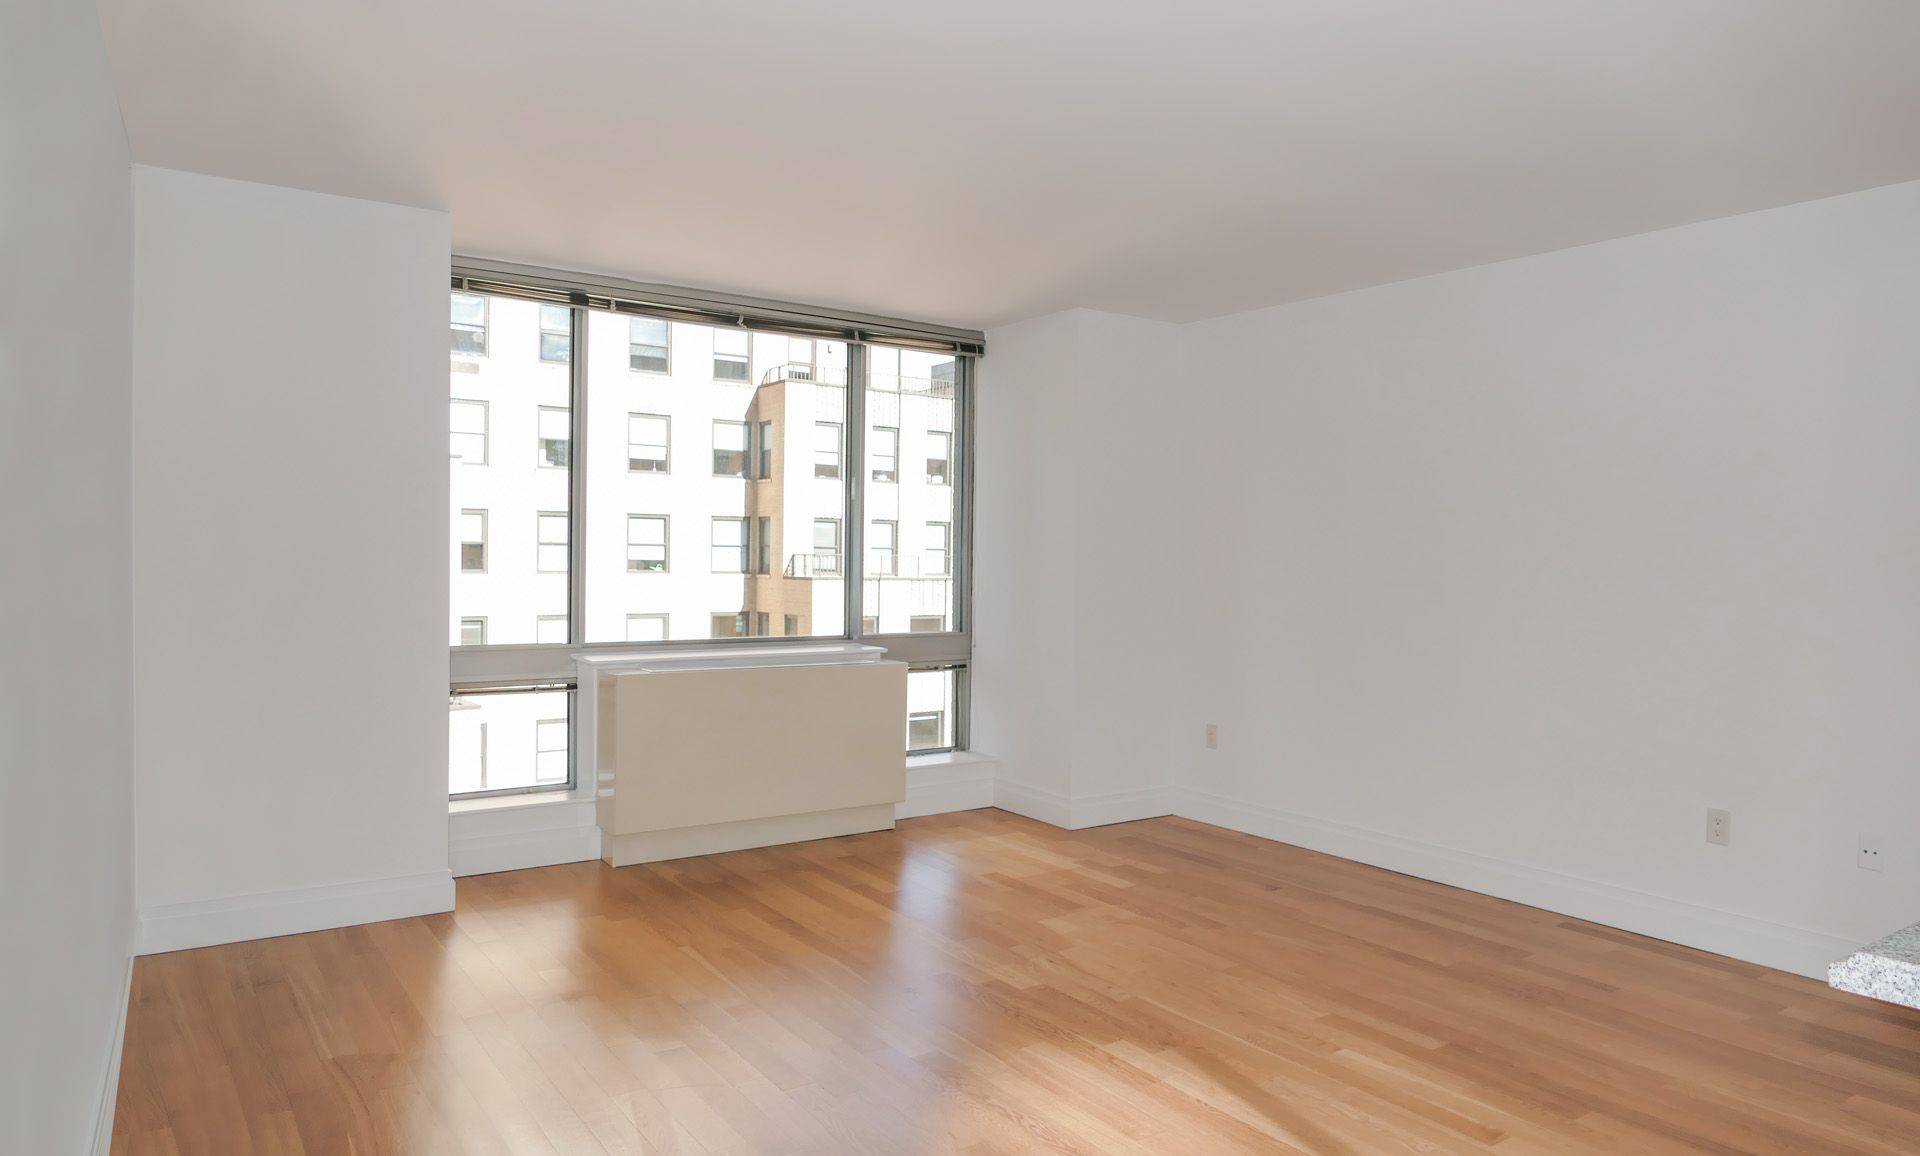 This gorgeous 1BR 1BA has plenty of light with floor to ceiling windows overlooking 44th street.